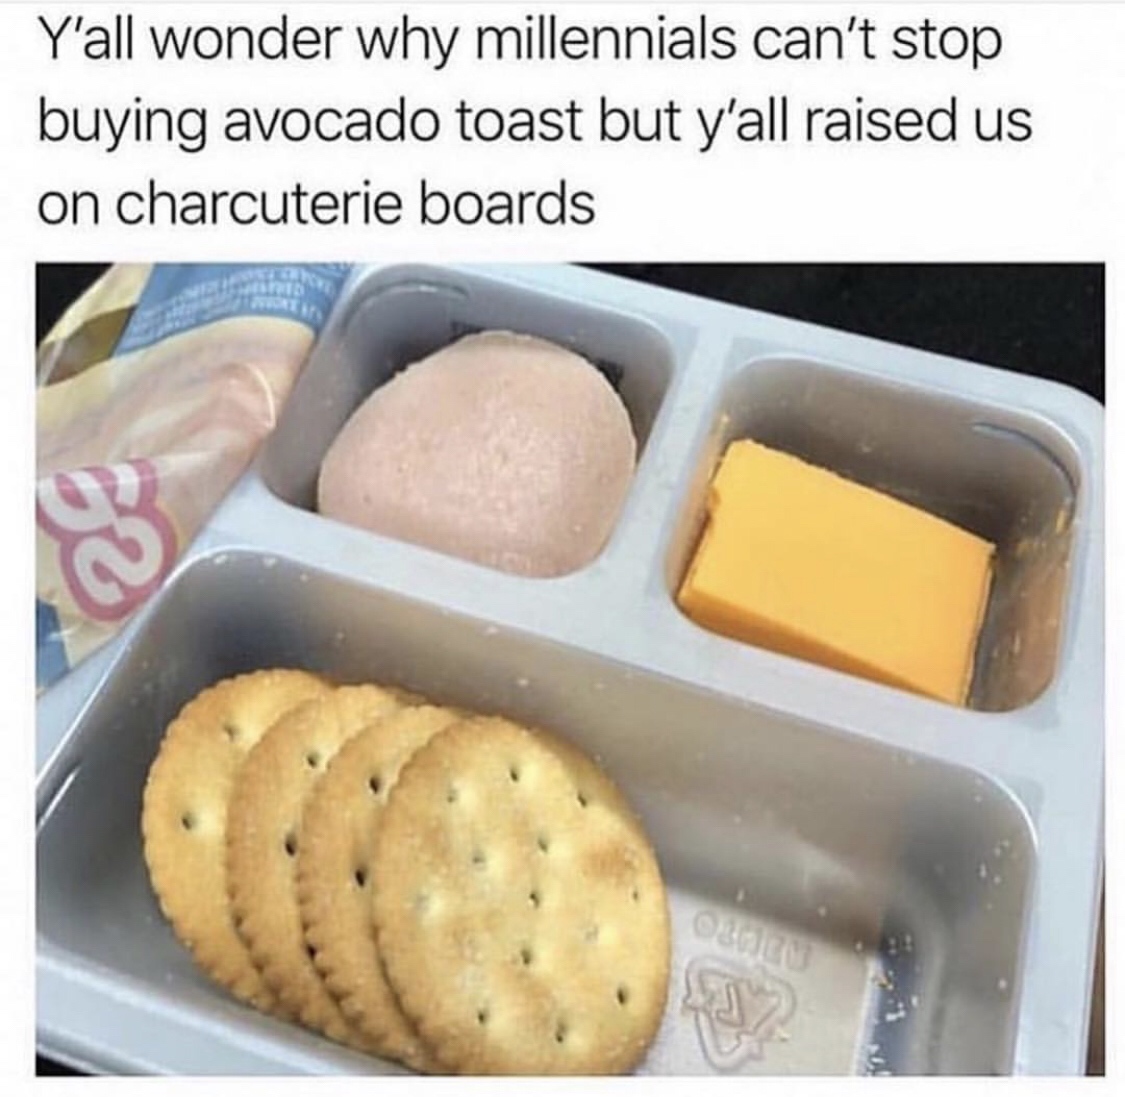 memes - millennials avocado toast meme - Y'all wonder why millennials can't stop buying avocado toast but y'all raised us on charcuterie boards